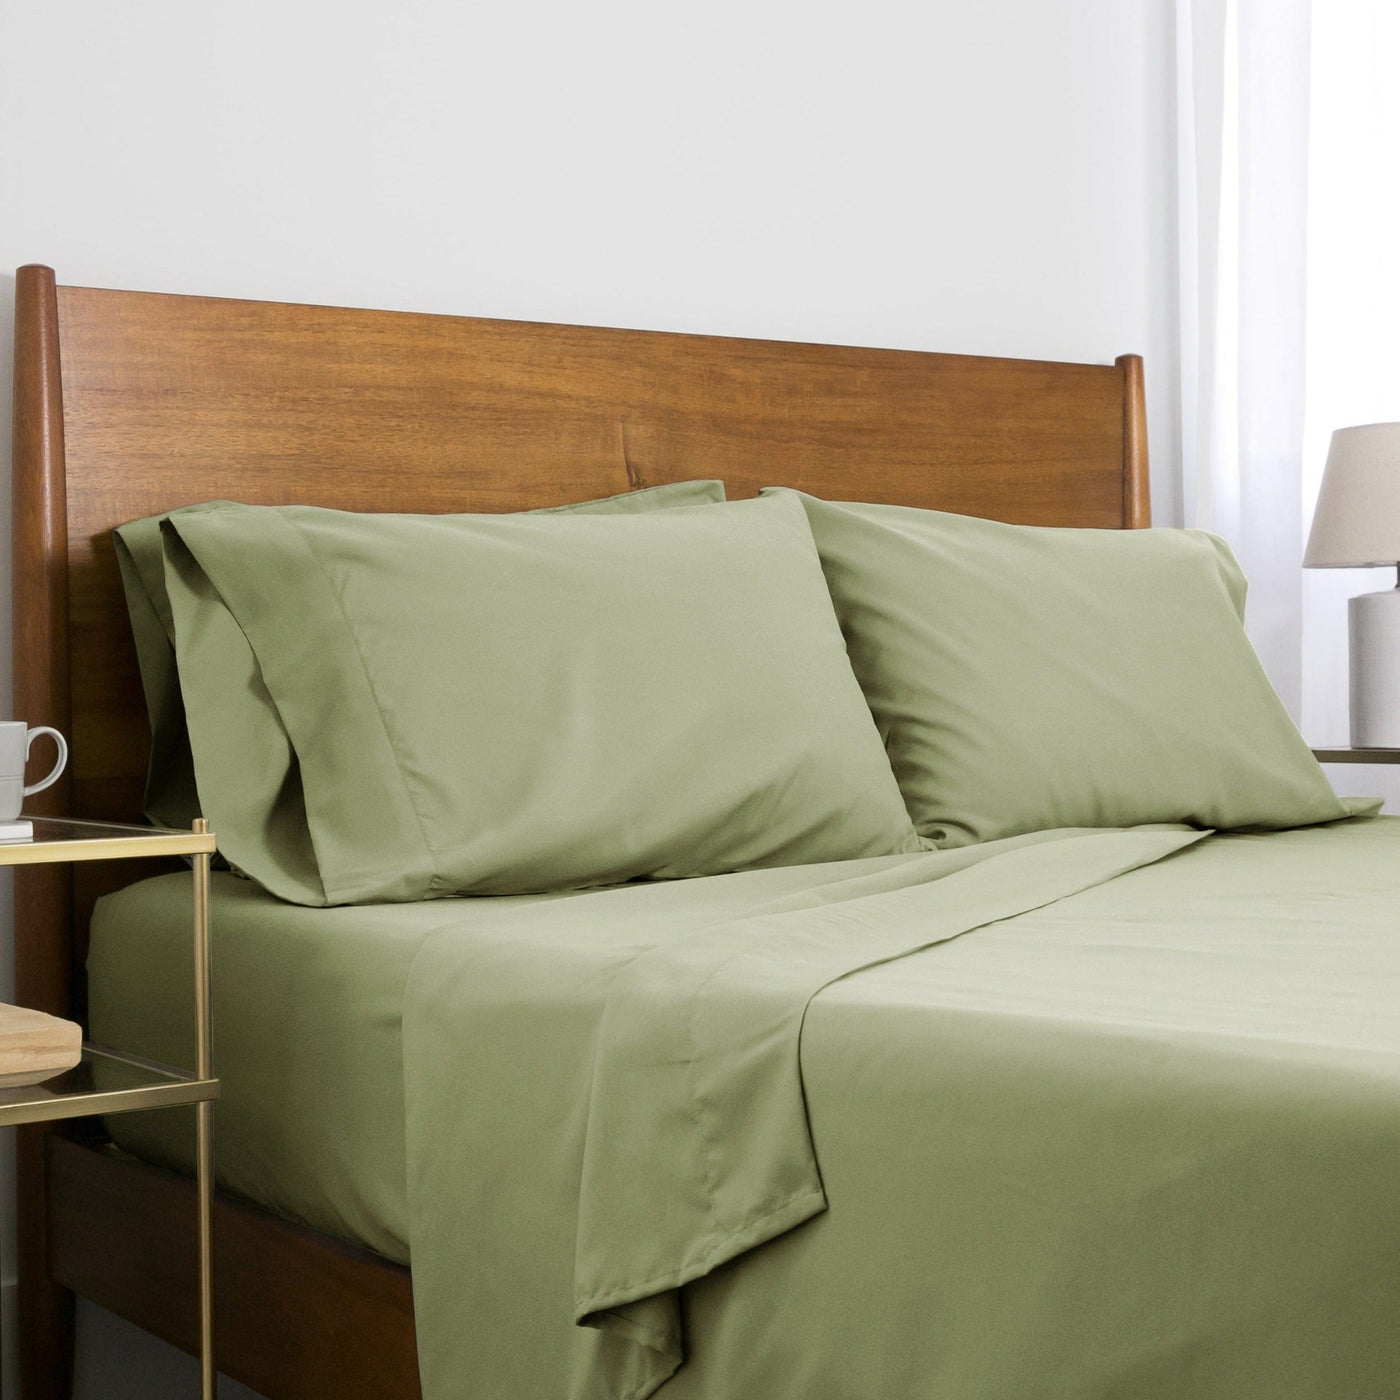 Side View of Everyday Essentials 6-Piece Sheet Set in Sage Green#color_sage-green